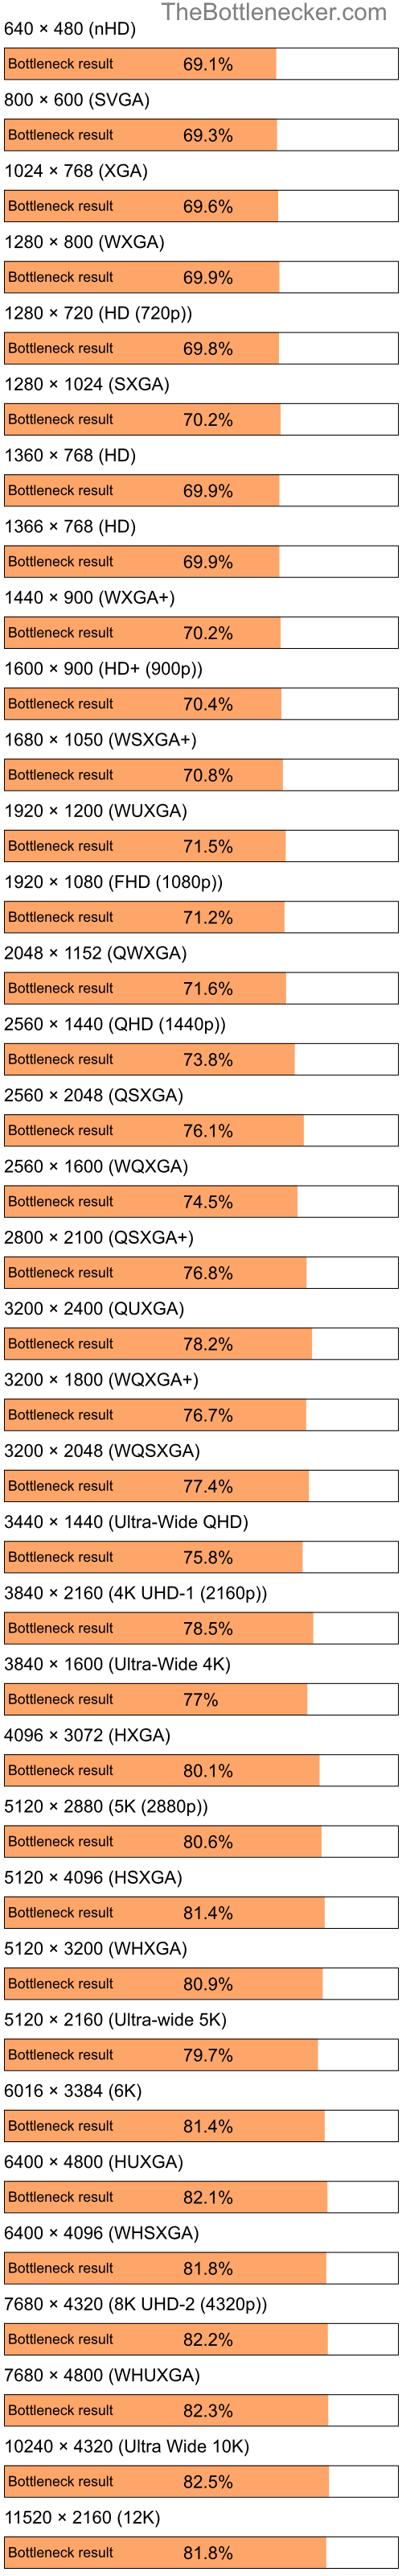 Bottleneck results by resolution for Intel Pentium 4 and AMD Mobility Radeon X1700 in Graphic Card Intense Tasks